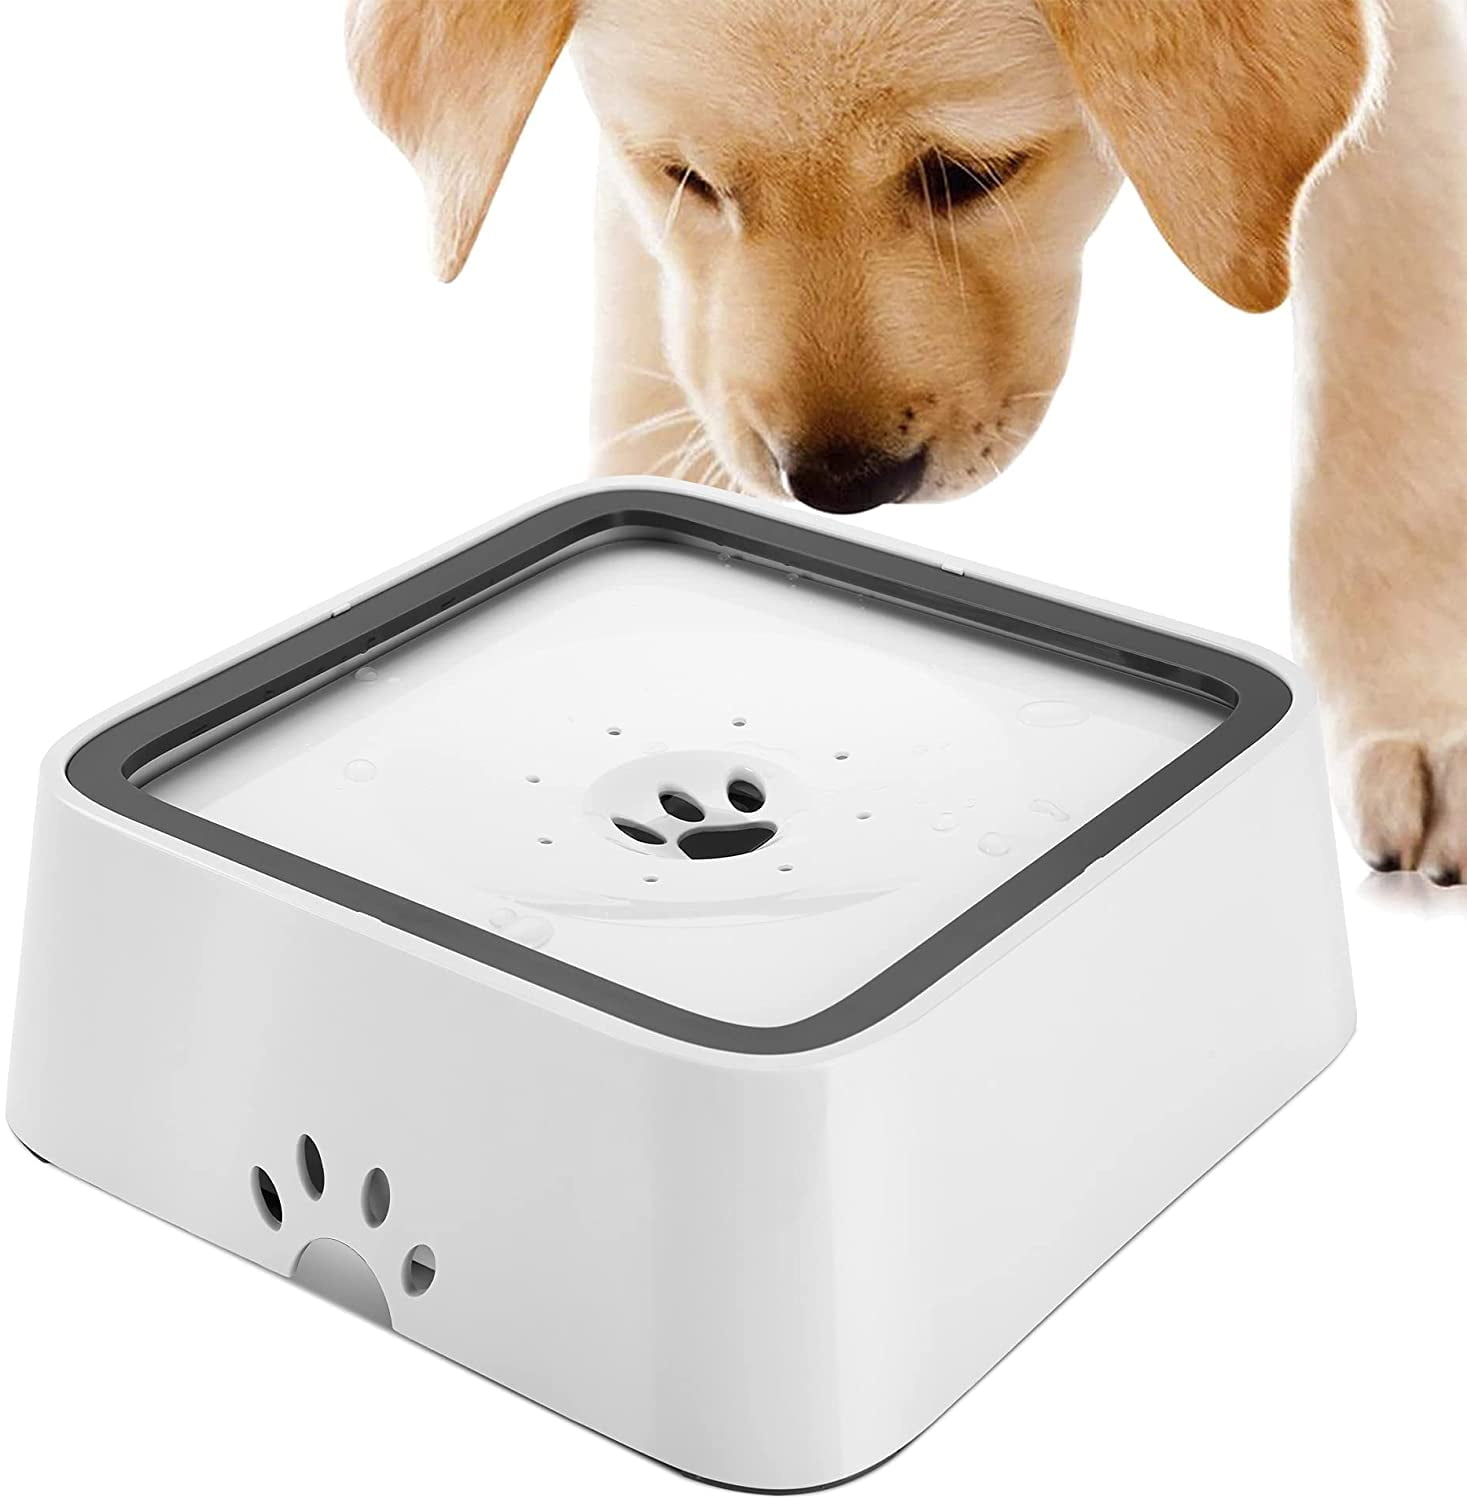 PETTOM Dog Floating Water Bowl with Filters,Upgraded 2L Car Pet Slow Water Feeder Bowl ABS Pet Drinking Fountain Non Spill and Dust-Proof White